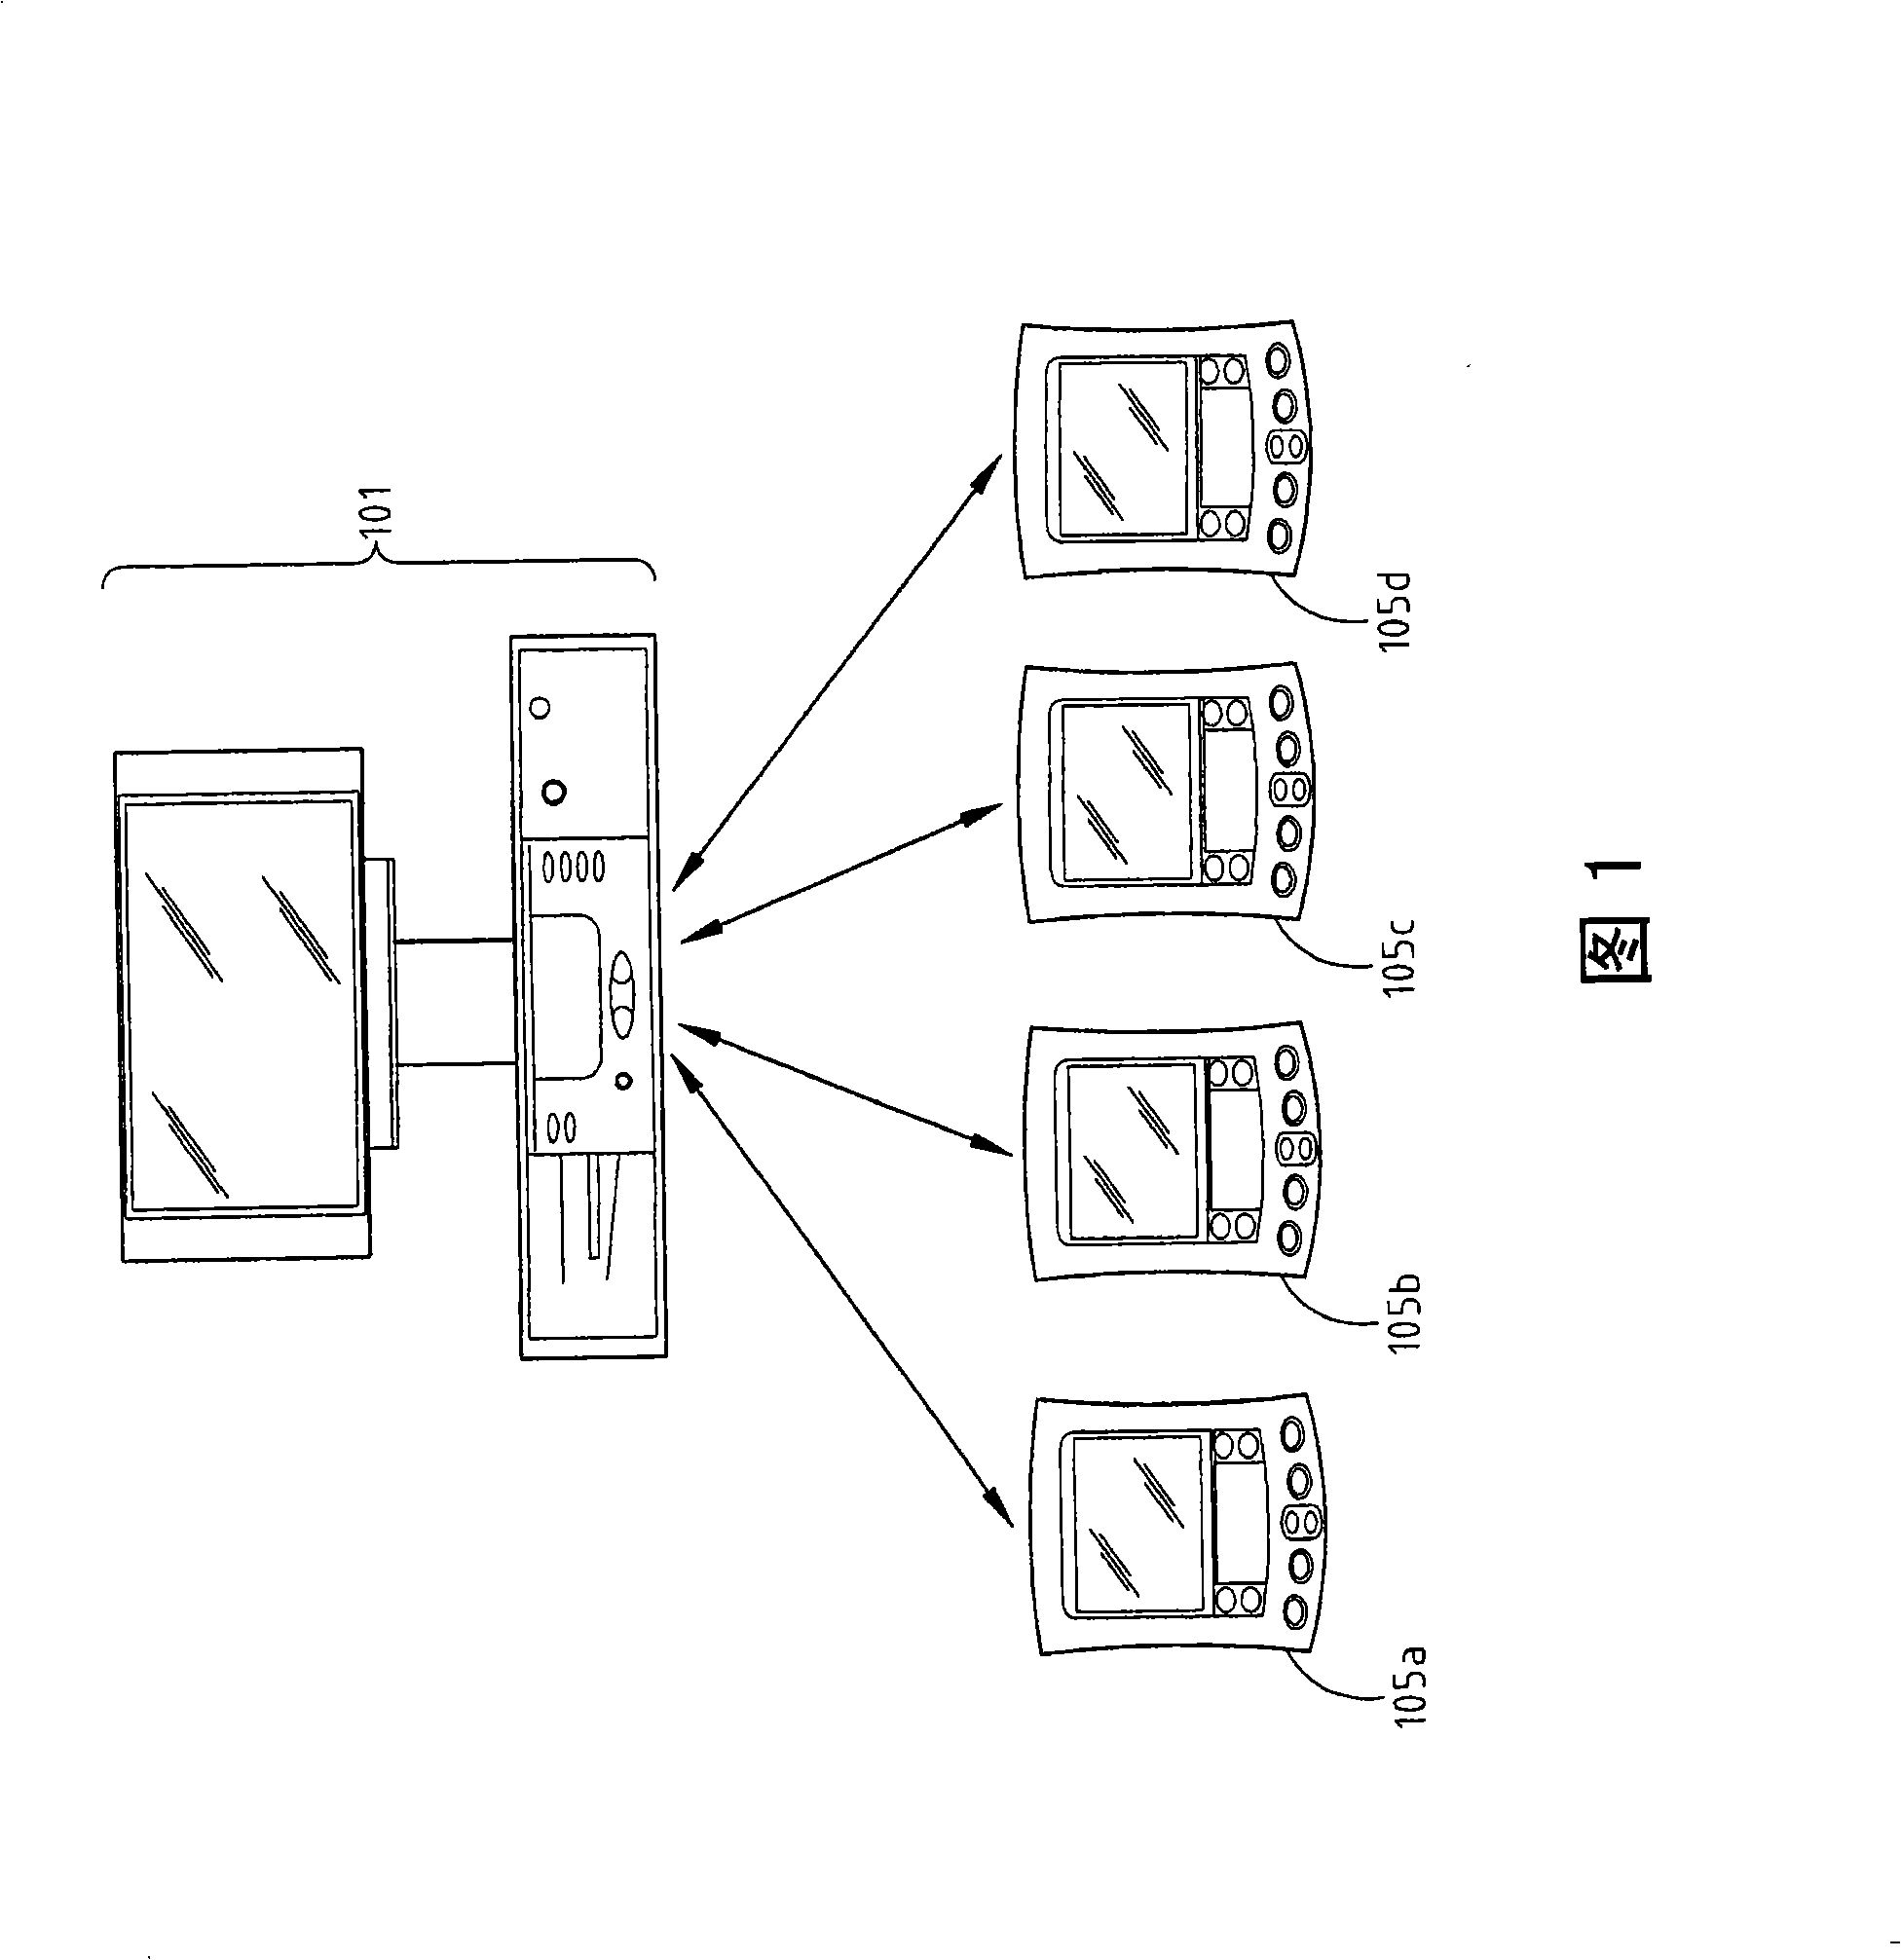 Double-screen interactive digital television system and method